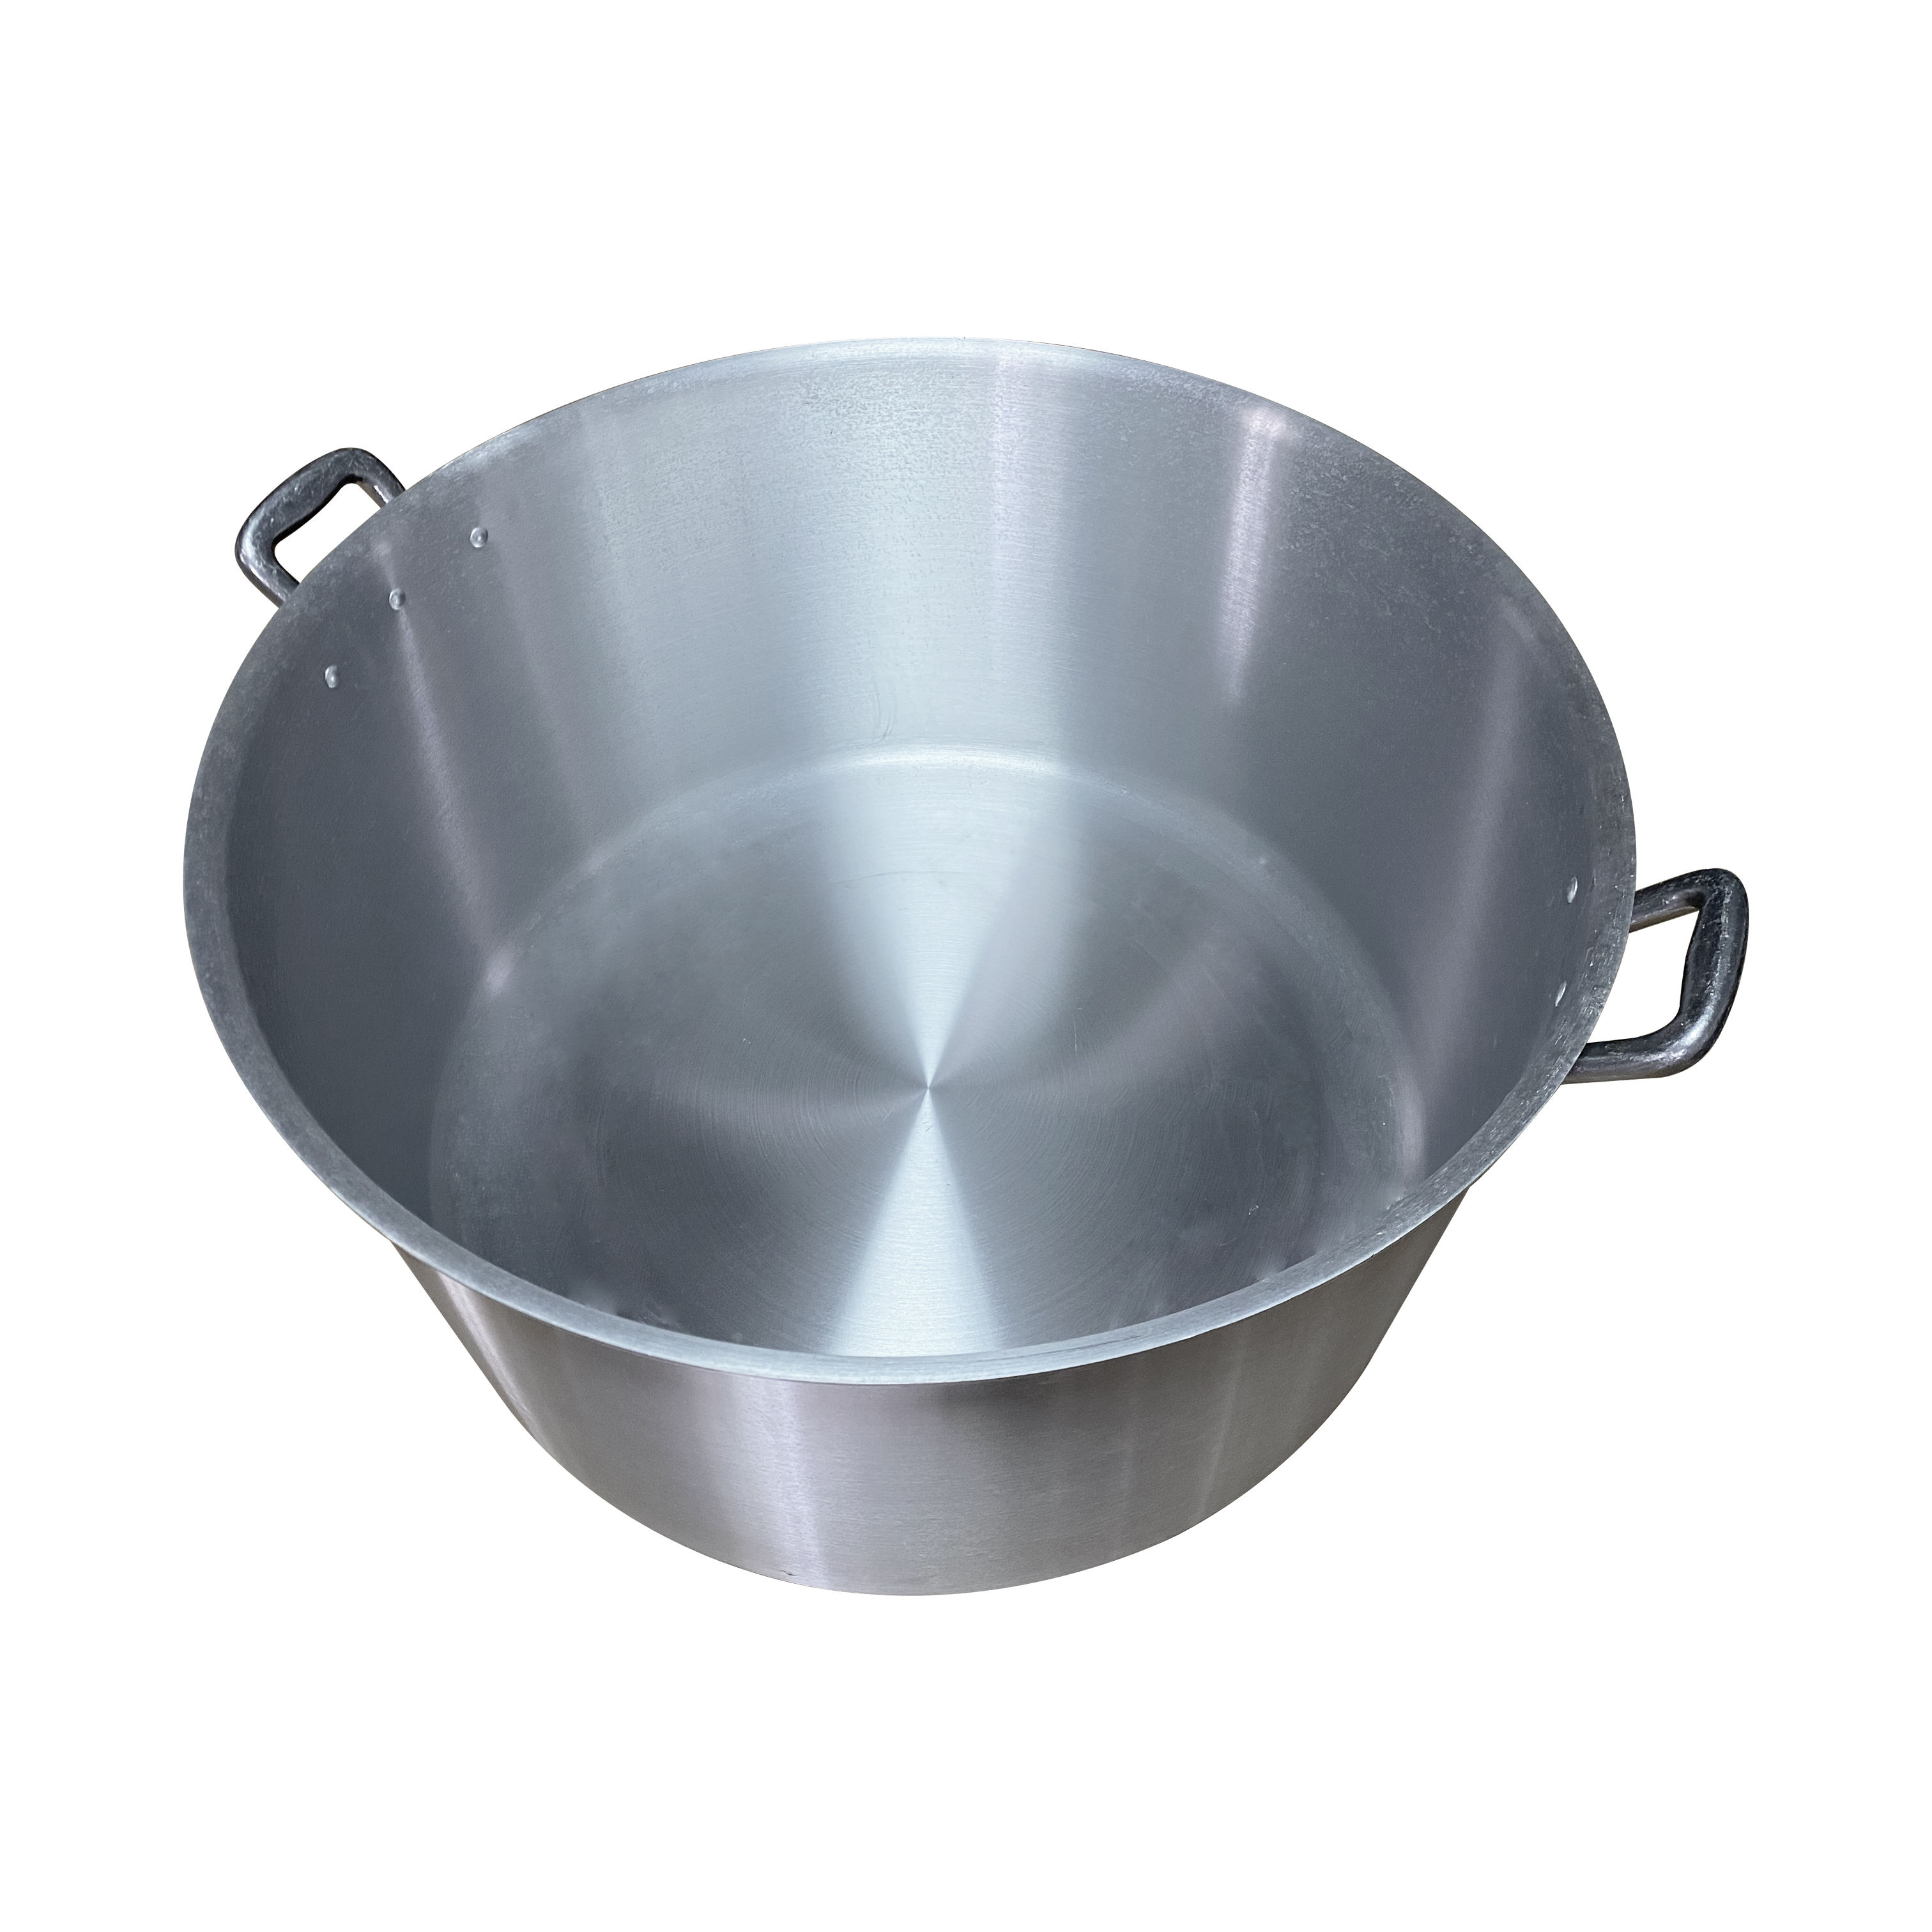 Why Choose Big Pots for Cooking?